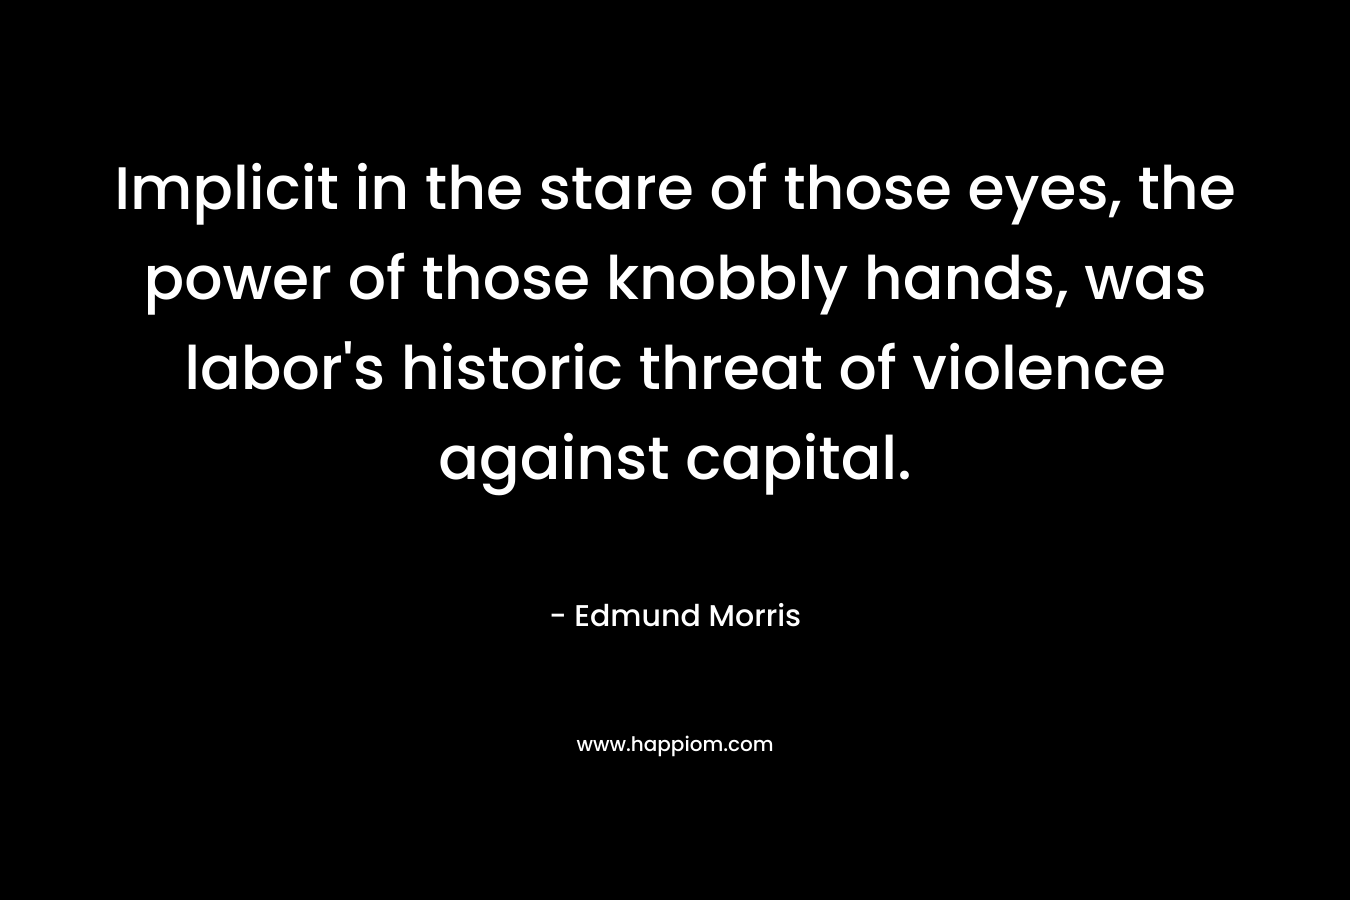 Implicit in the stare of those eyes, the power of those knobbly hands, was labor’s historic threat of violence against capital. – Edmund Morris